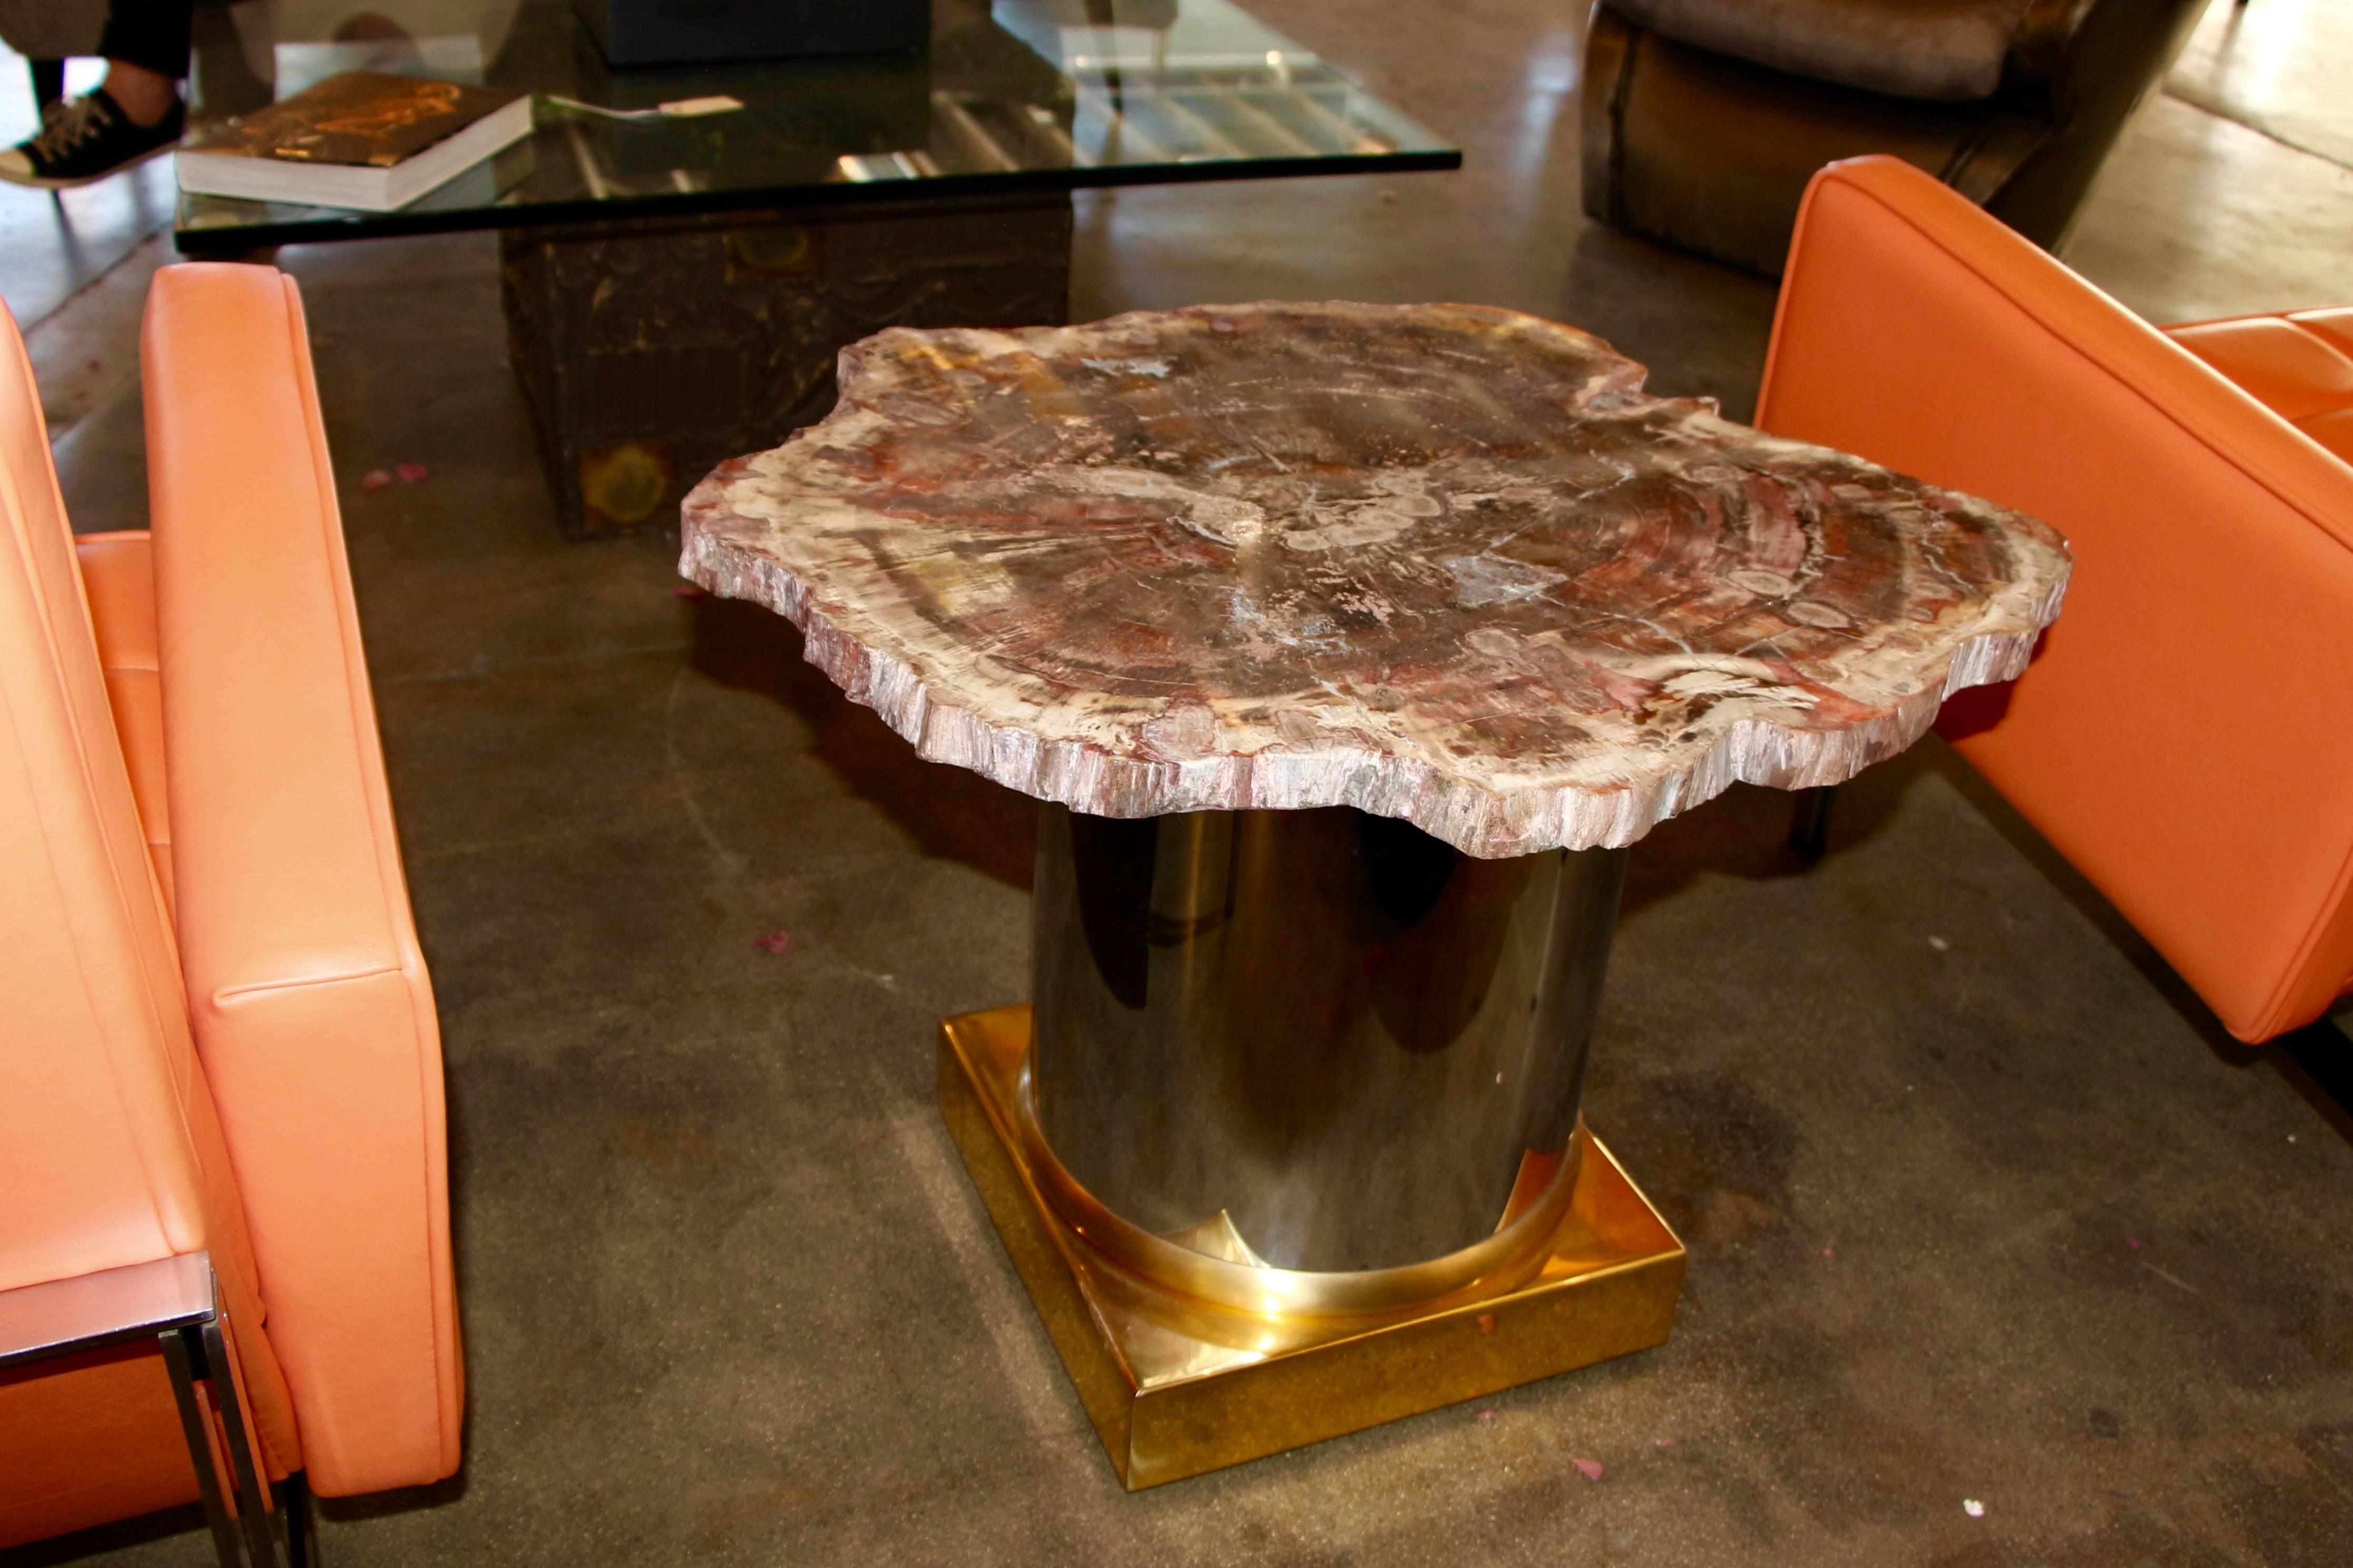 We found matched a 1980s base with a spectacular Arizona Petried wood top with a brass and steel base. It is important to note that this is real Arizona petrified wood not the imported Asian variety which is a very different kind of petrified wood.